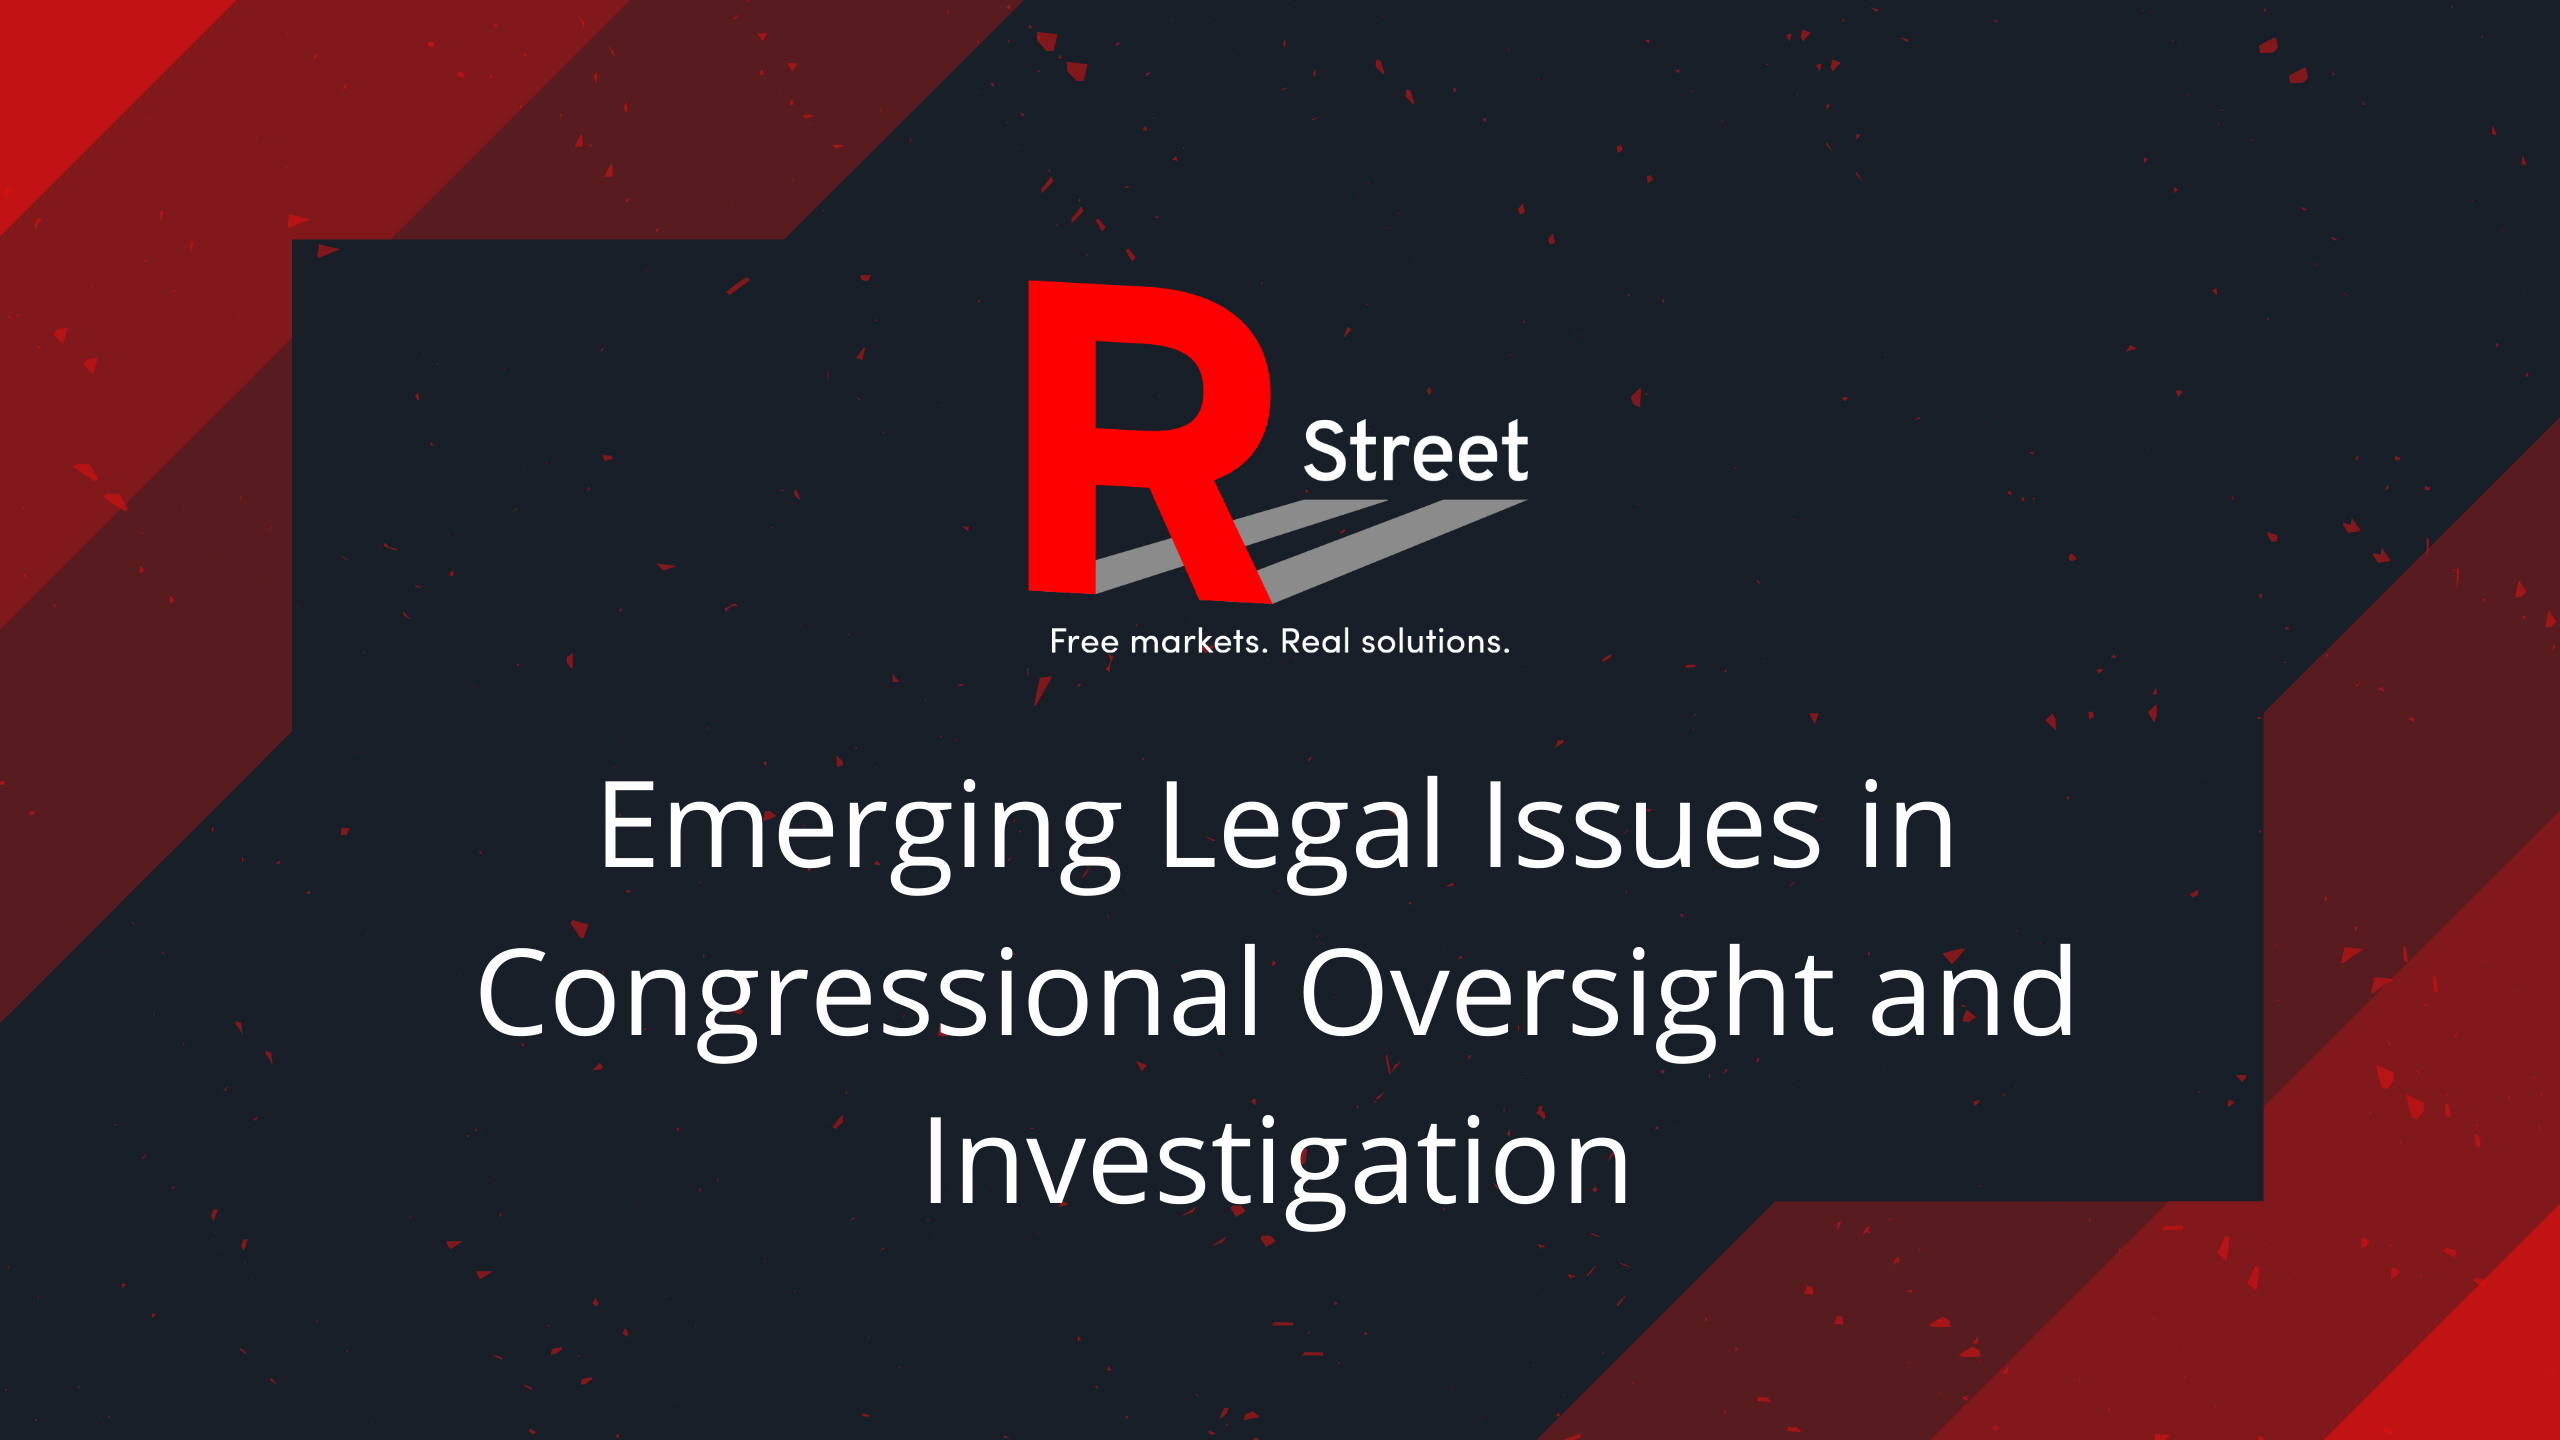 Emerging Legal Issues in Congressional Oversight and Investigation